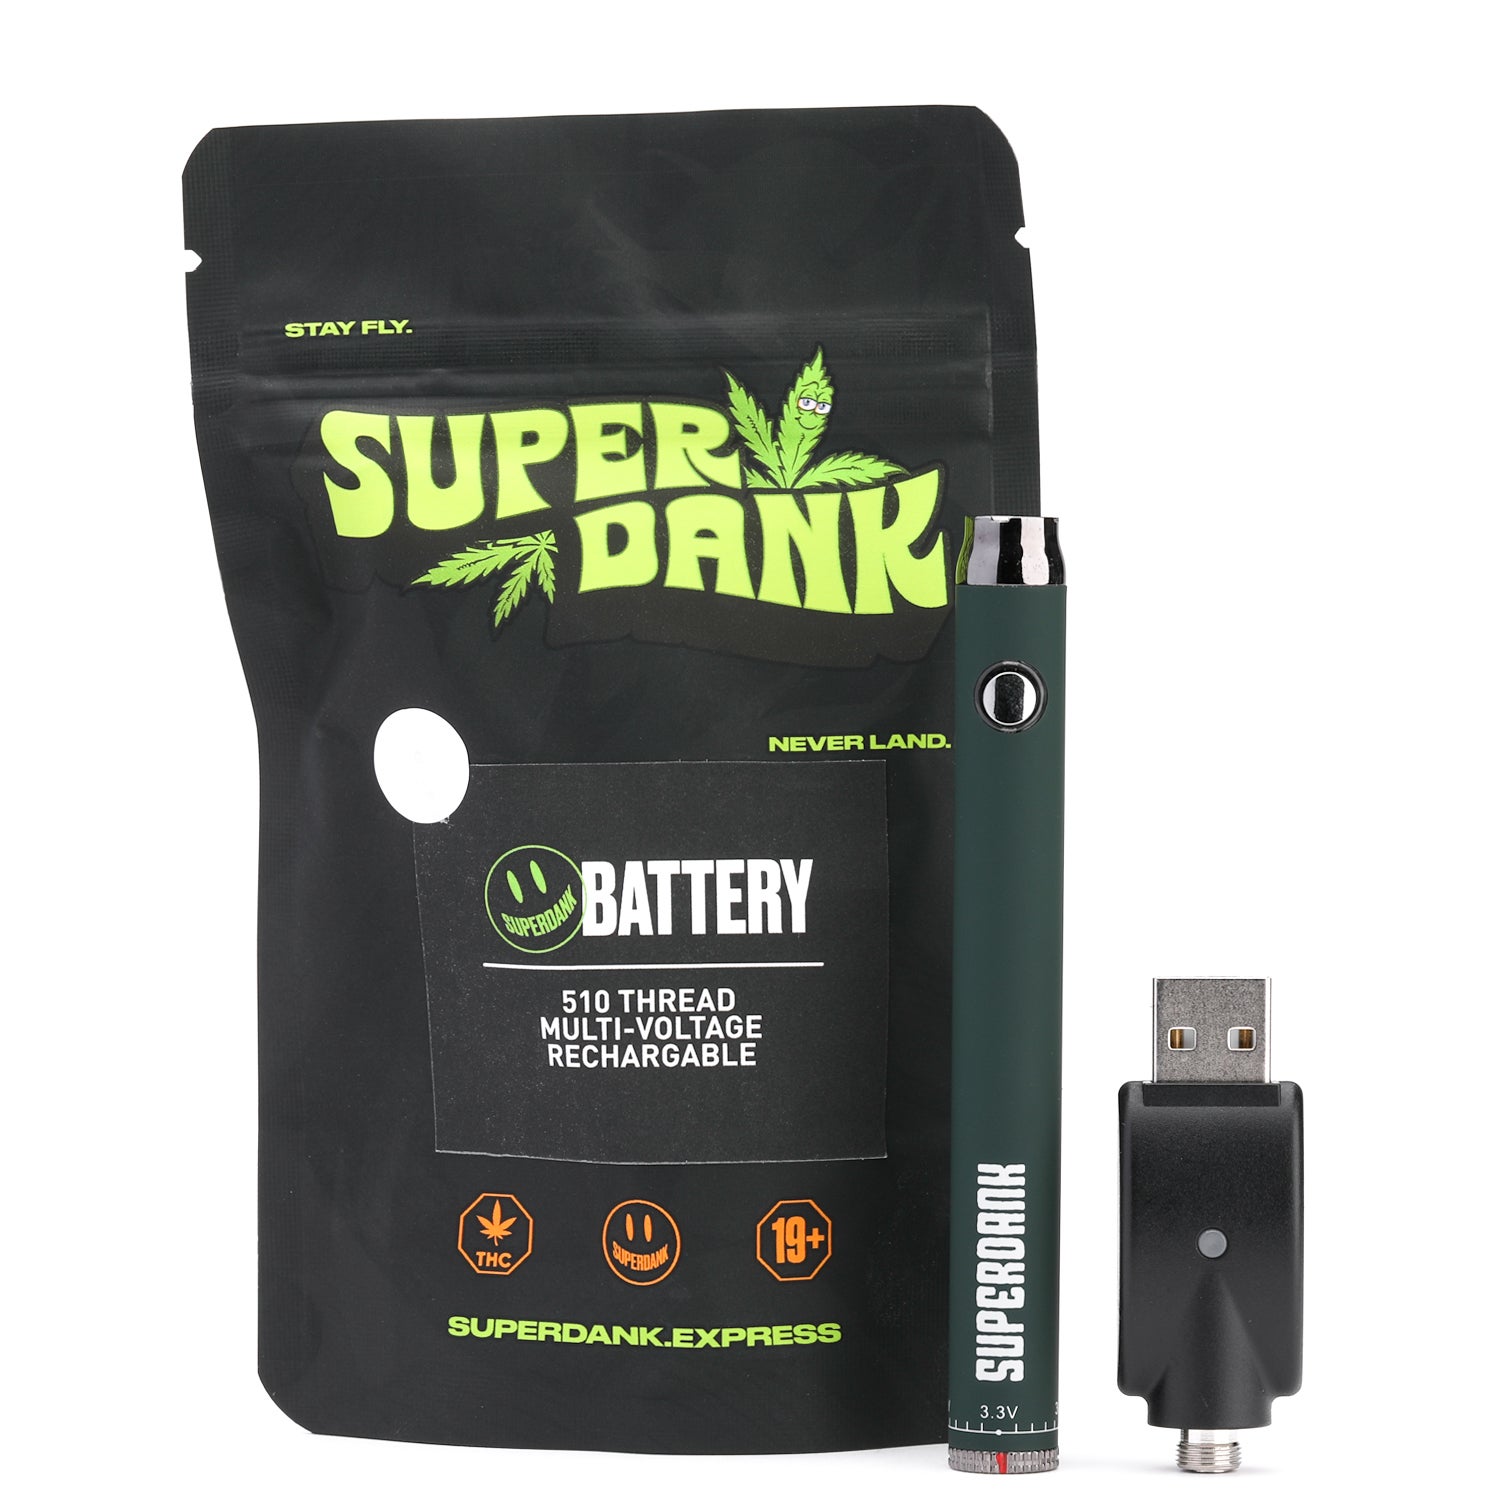 SUPERDANK Battery and Charger